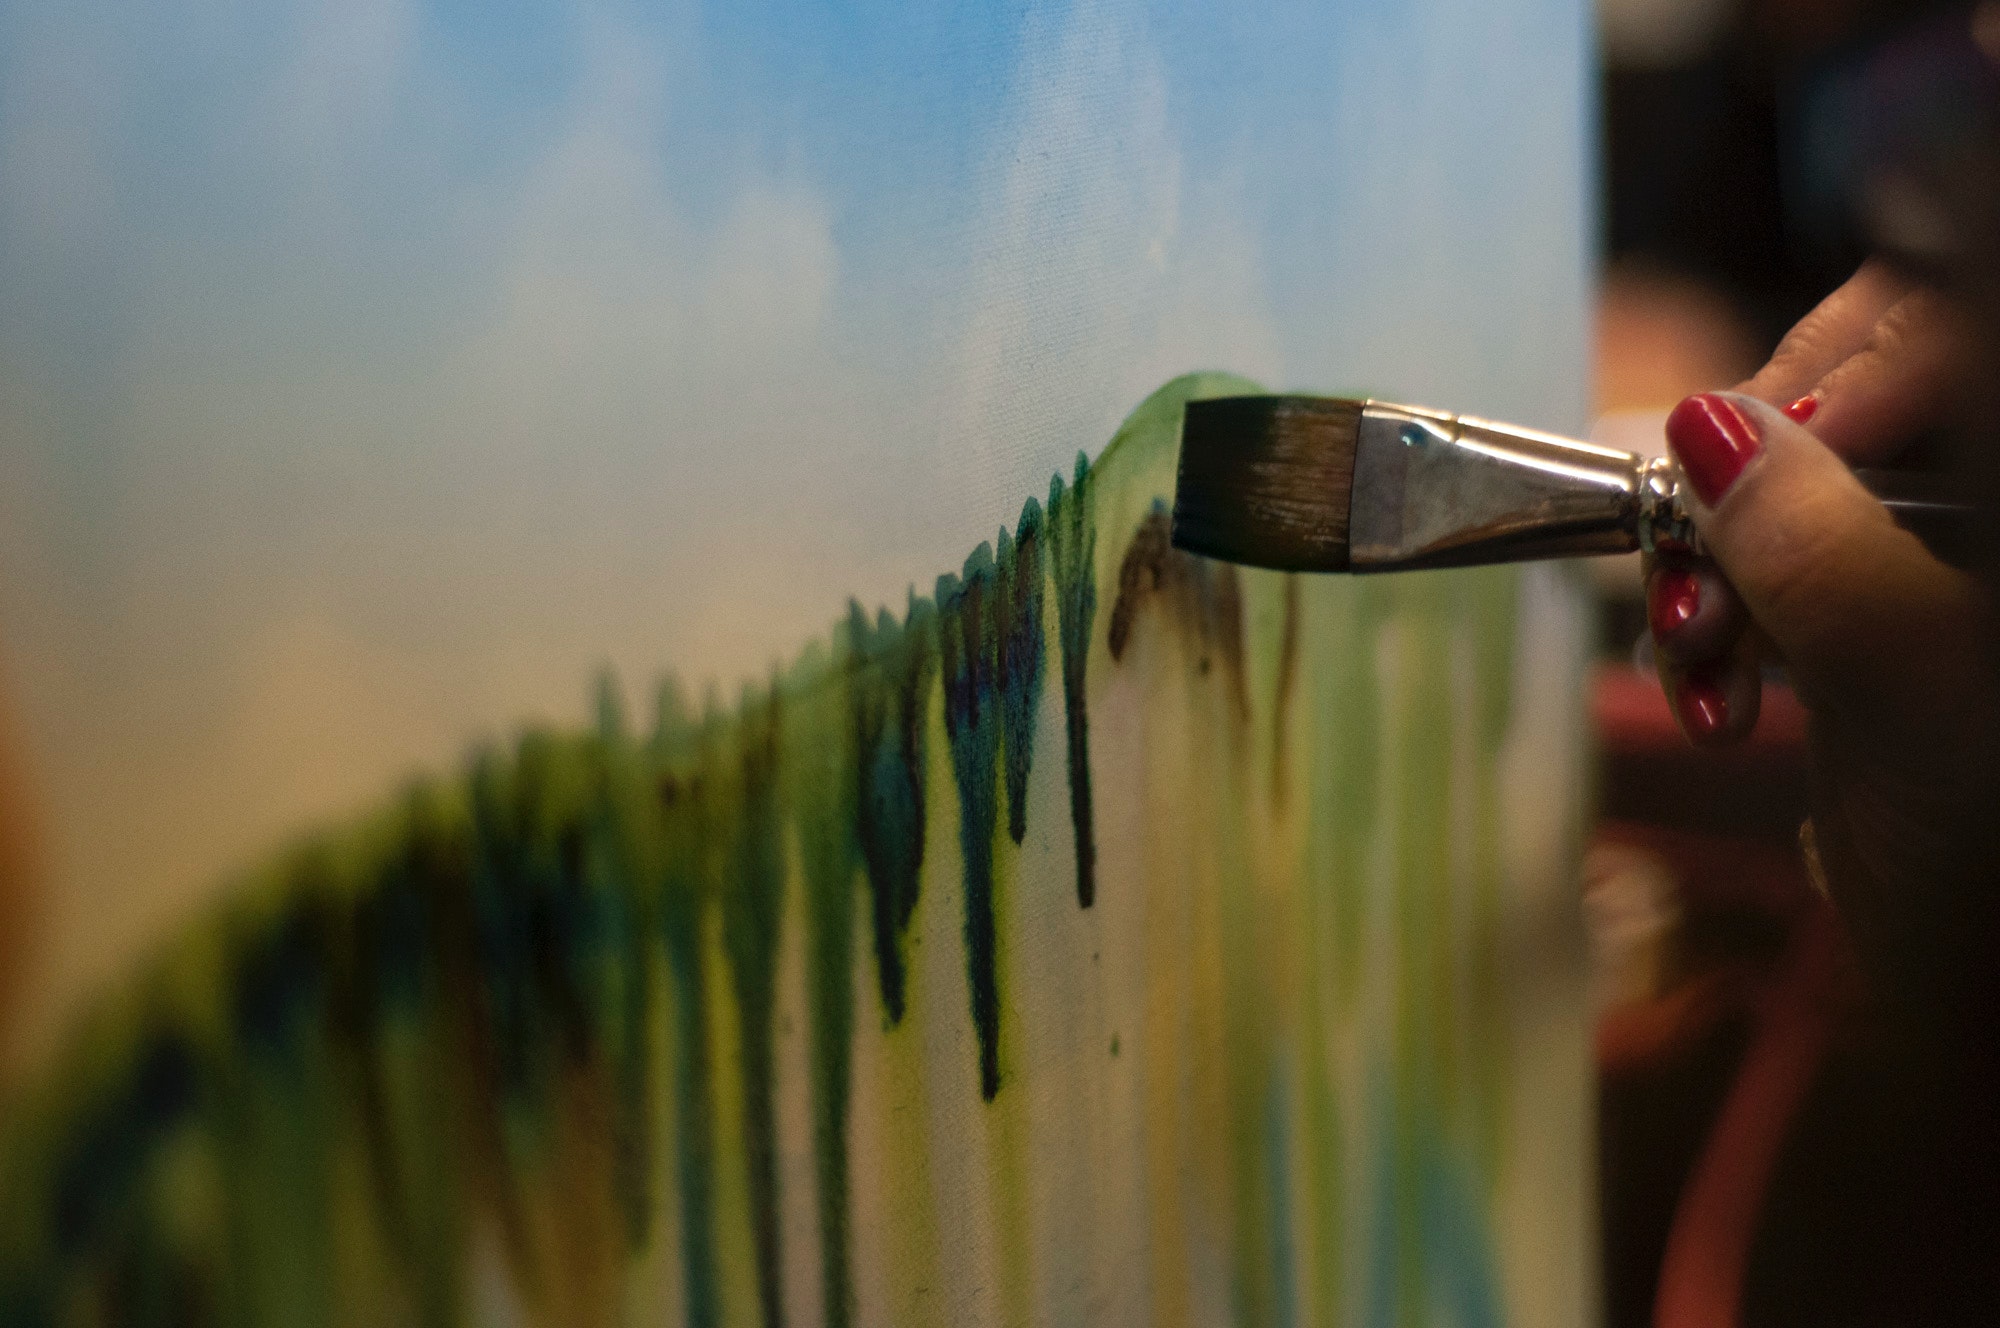 picture shows a paintbrush being used to paint on a canvas showing a blue sky with clouds and green paint showing a landscape 